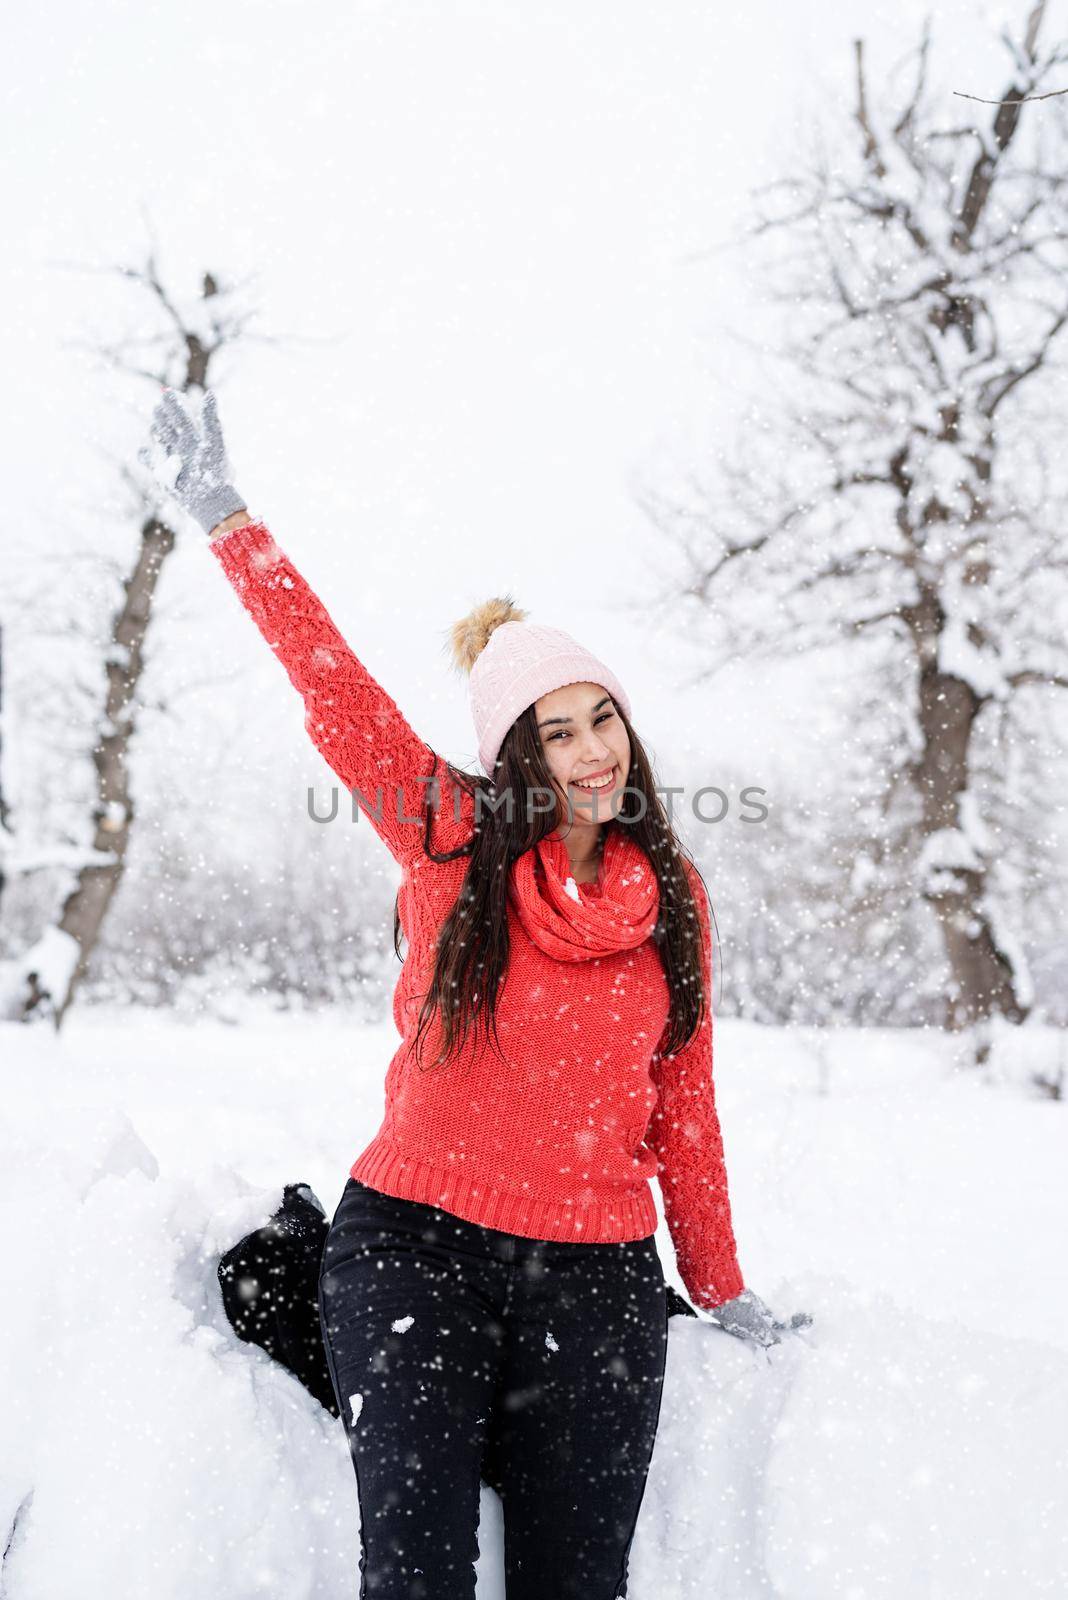 Winter season. Portrait of a beautiful smiling woman in red sweater and hat in snowy park waving hello